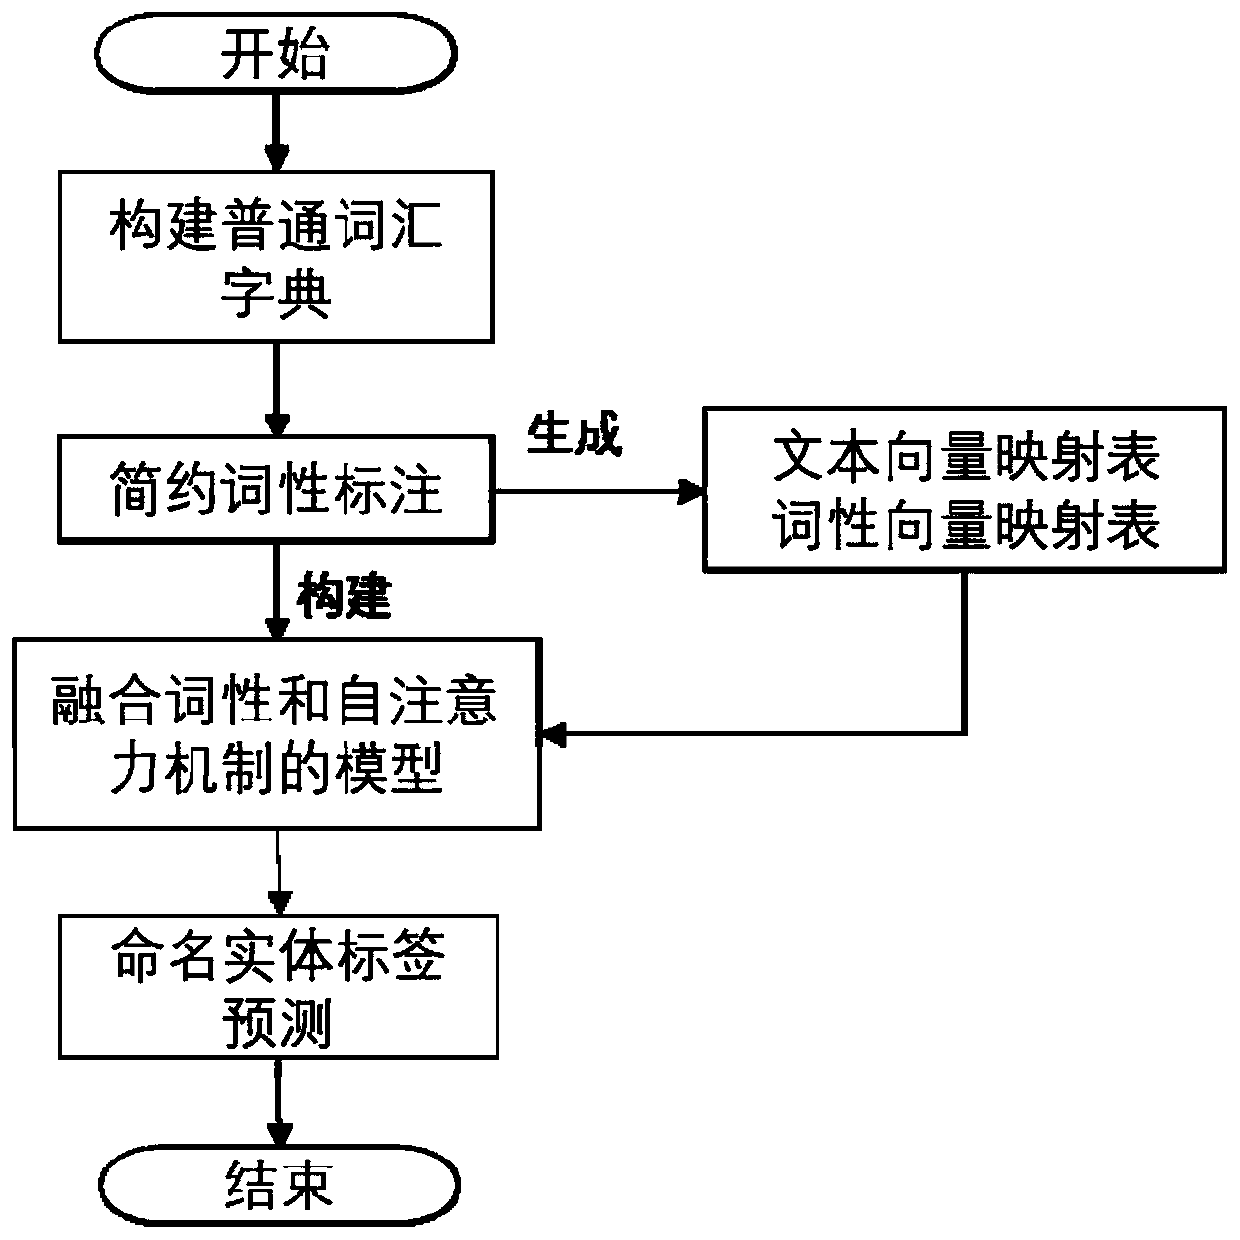 Chinese electronic medical record named entity recognition method